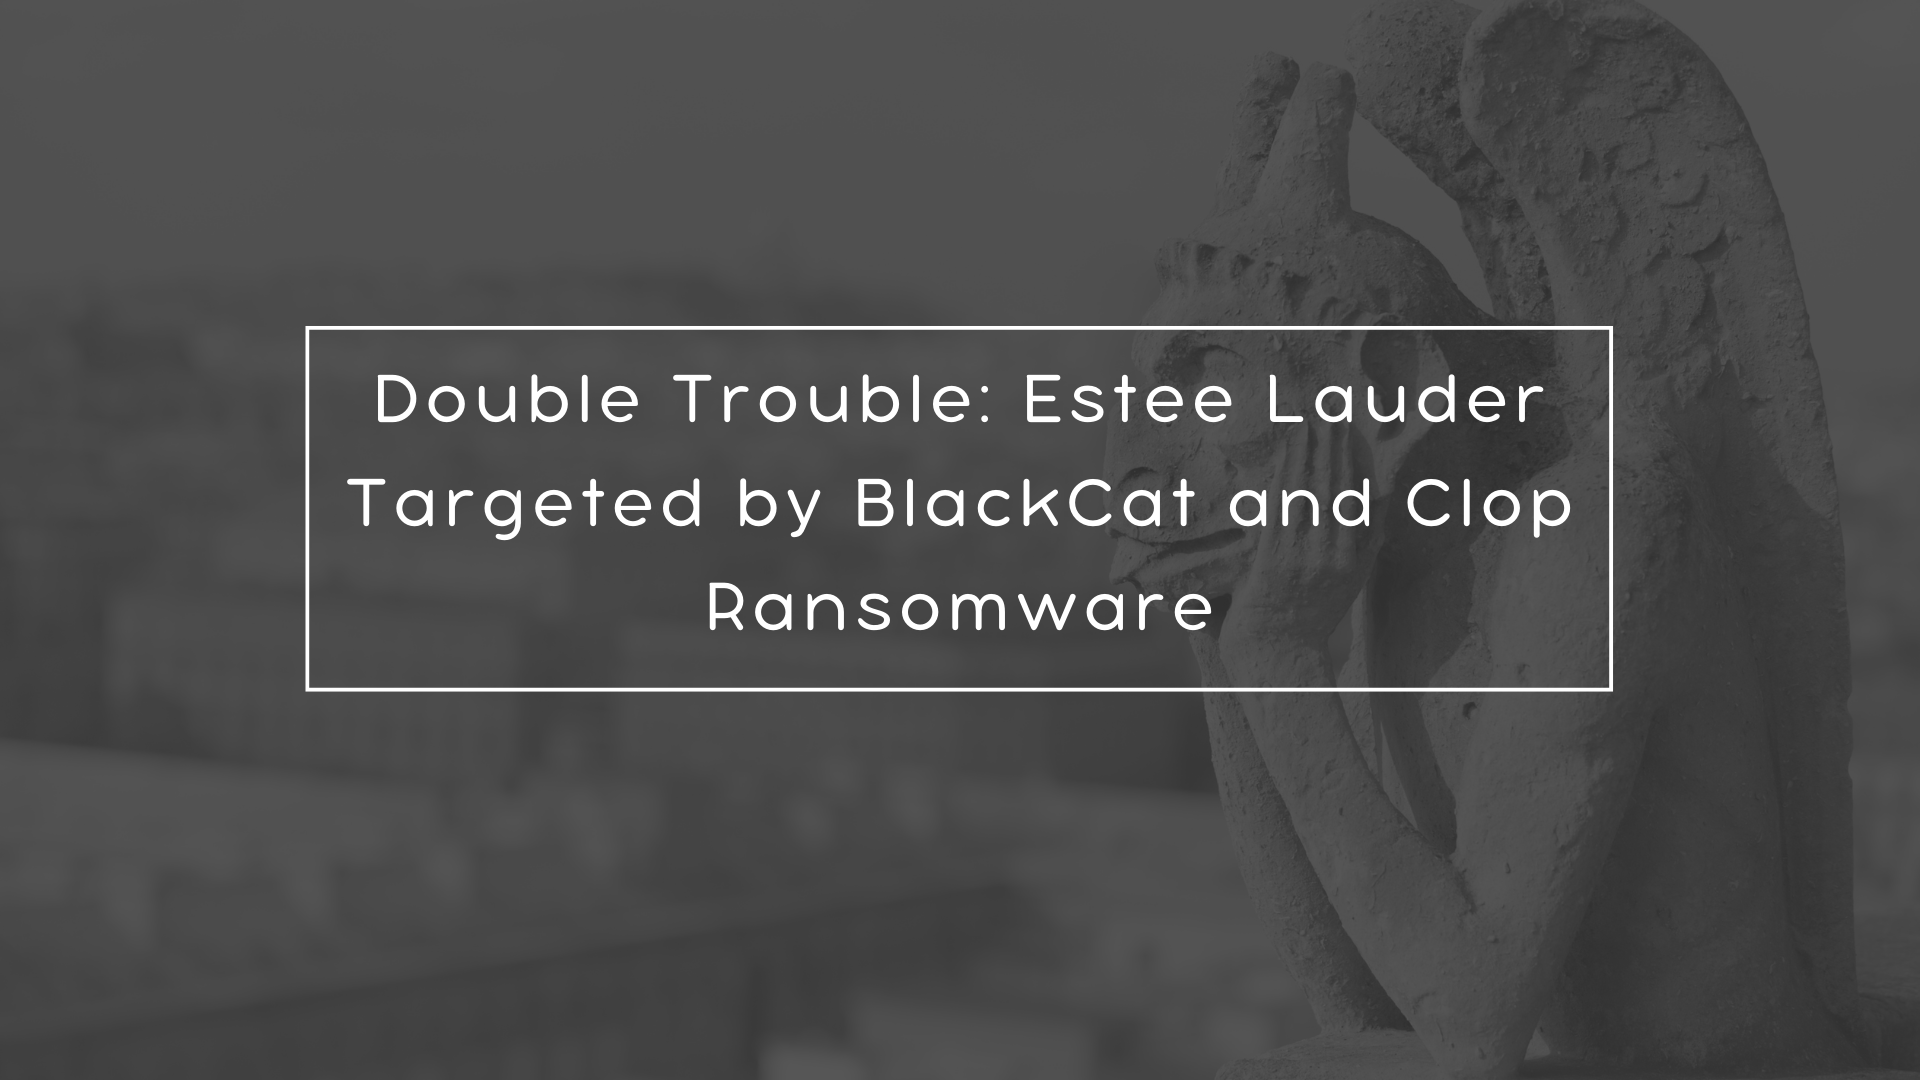 Double Trouble: Estee Lauder Targeted by BlackCat and Cl0p Ransomware